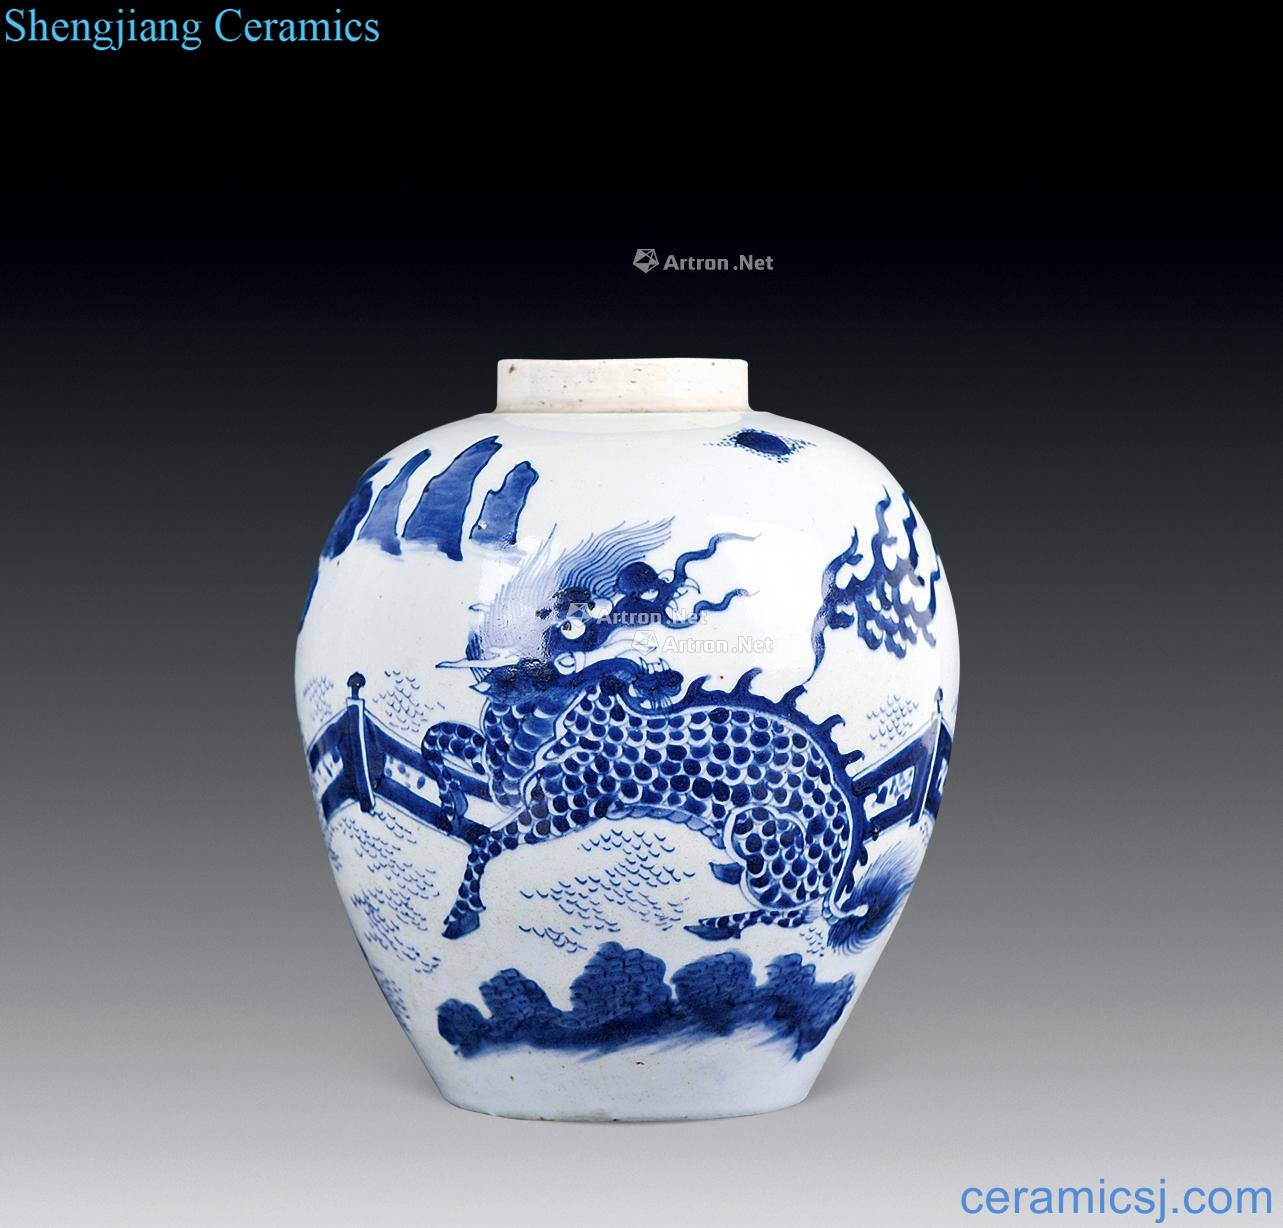 In the qing dynasty Kylin grain canister